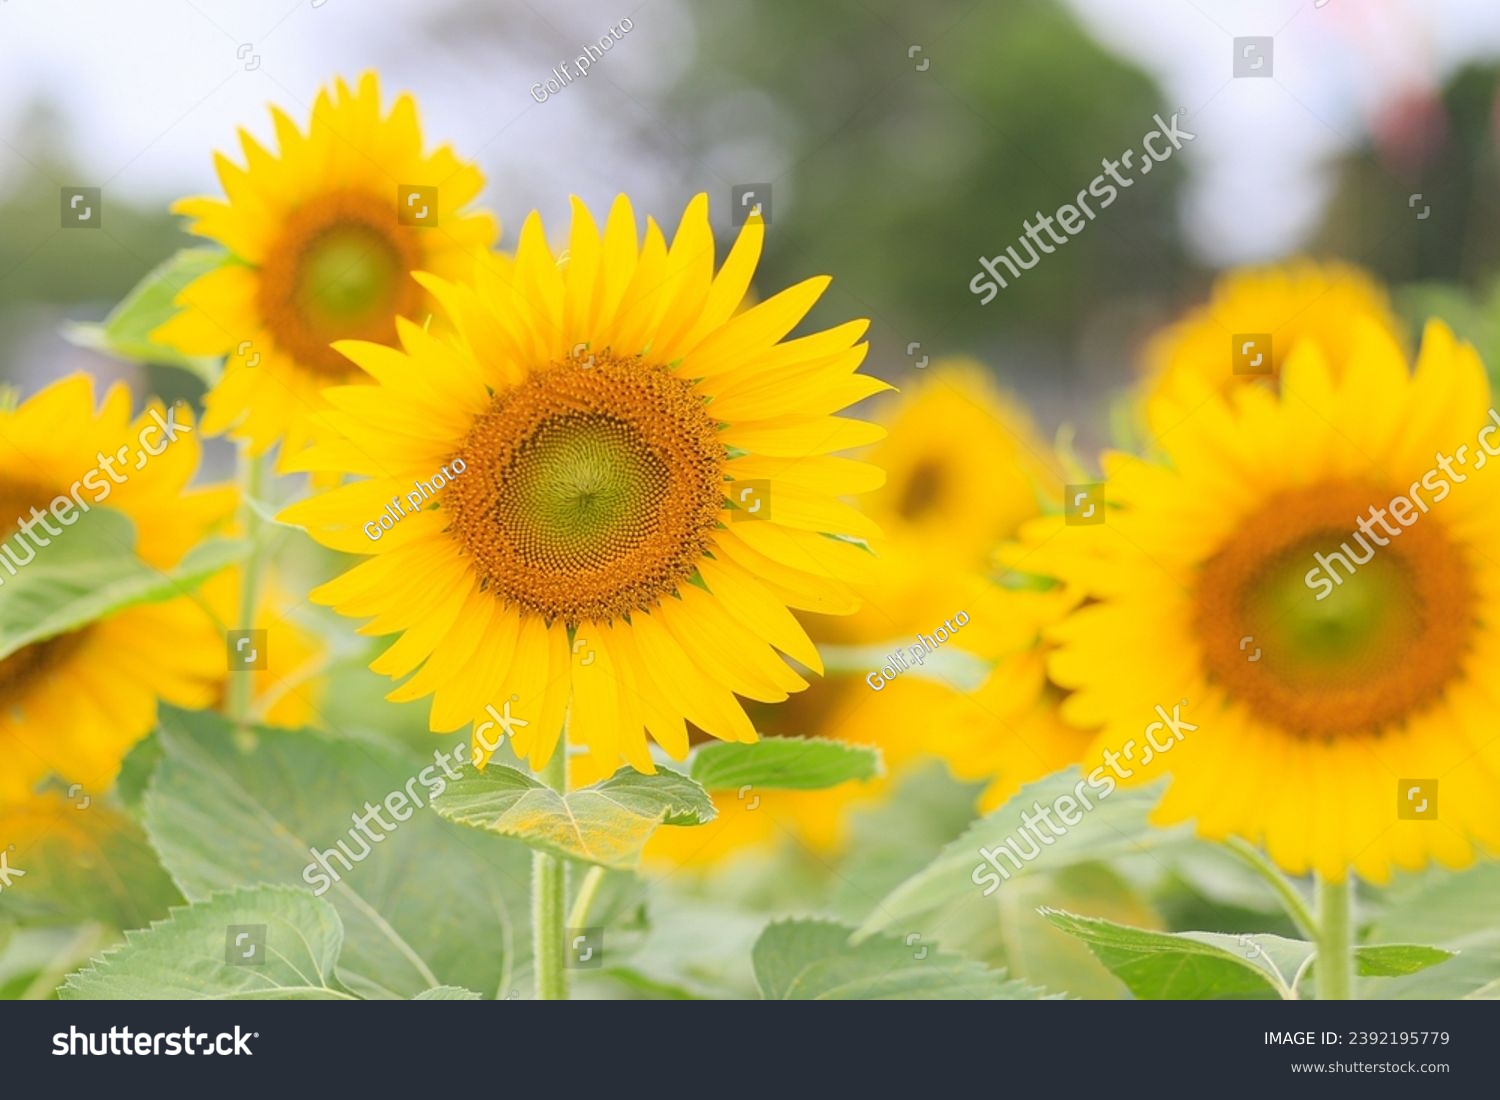 Seelctive focus Vibrant yellow sunflower with fresh petals in nature's beauty on blur background #2392195779